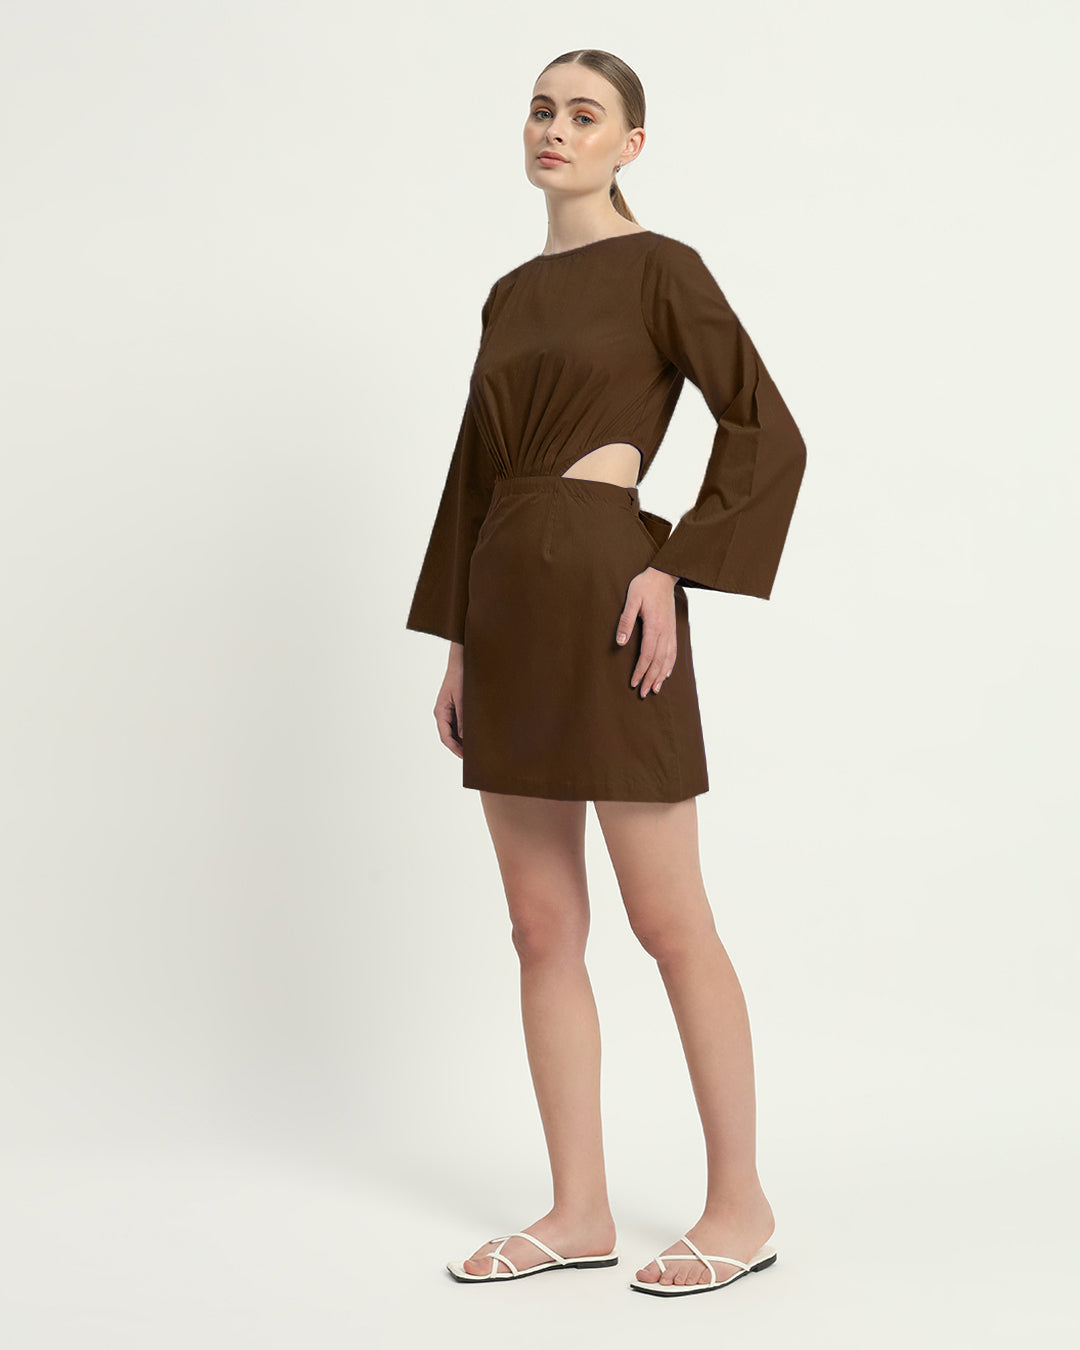 The Eloy Nutshell Cotton Dress